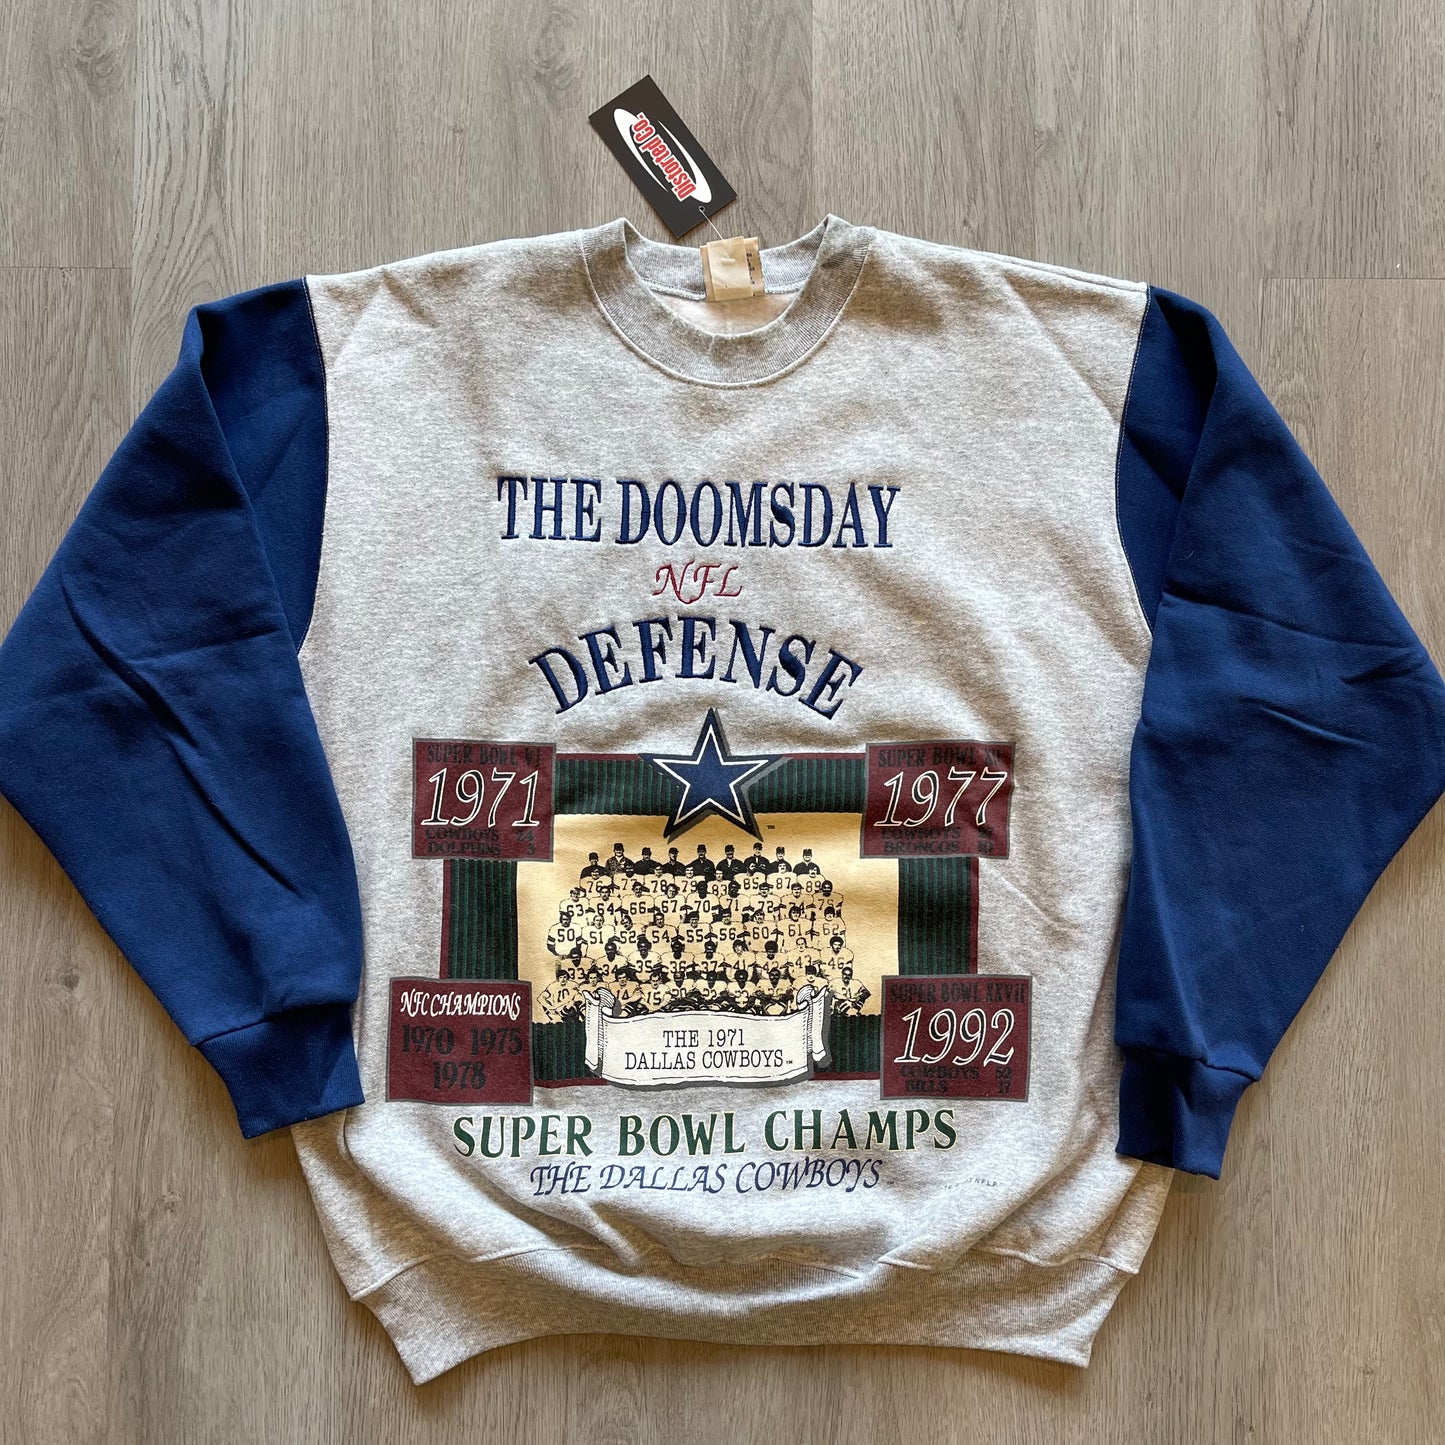 The Doomsday NFL Defense Cowboy Pull over 1971